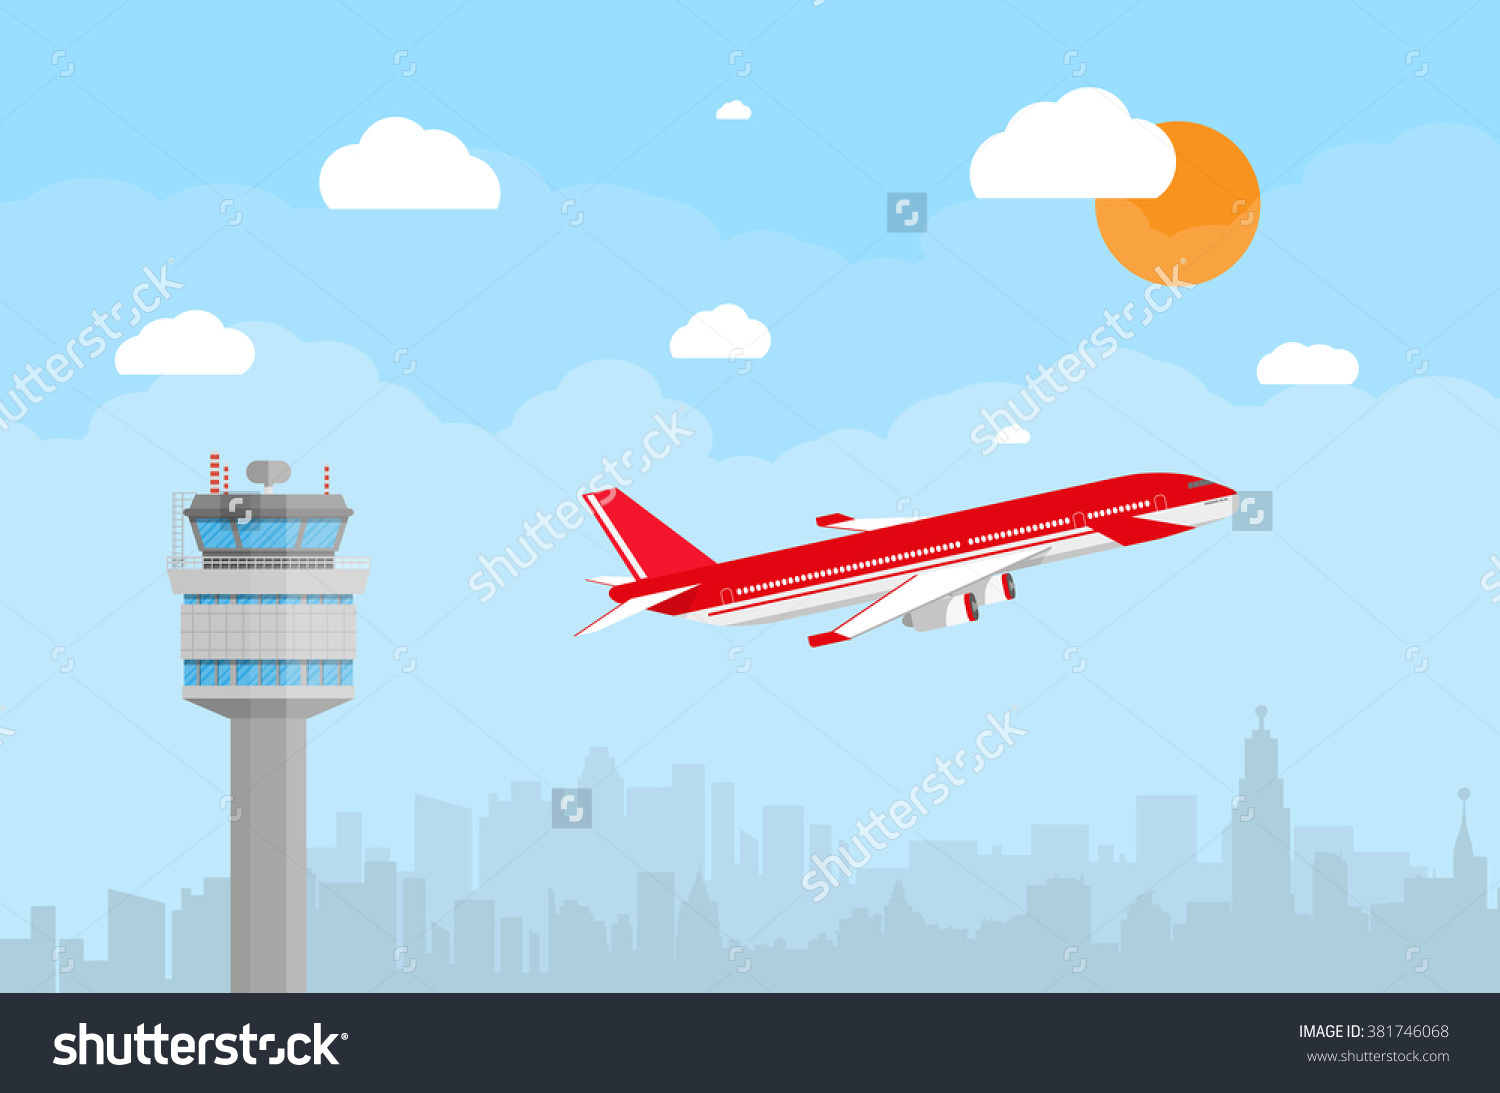 clipart airport - photo #47